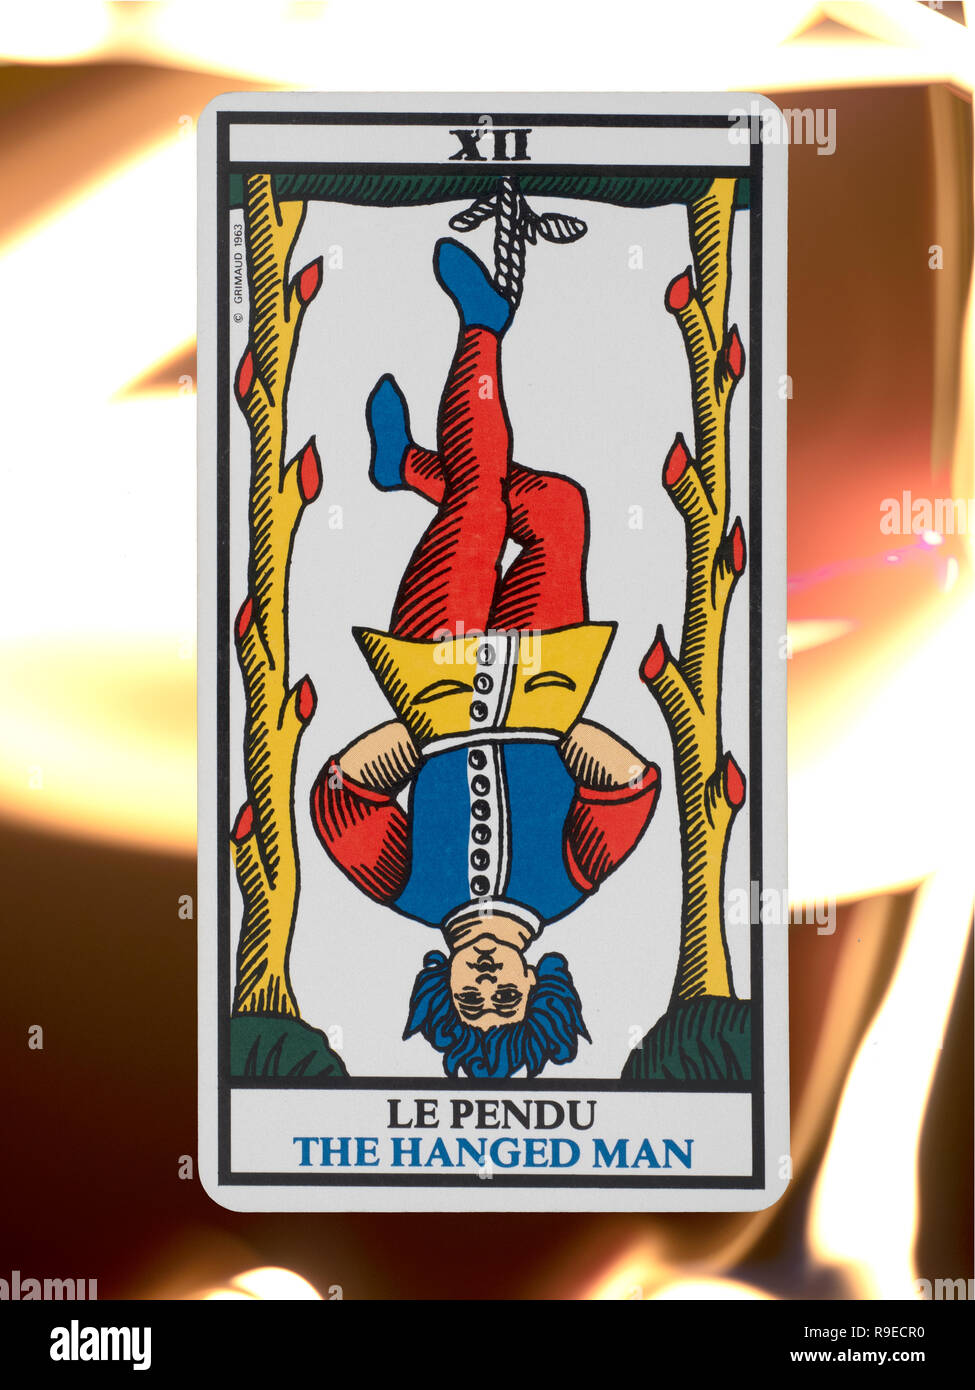 The Hanged Man, tarot card from a deck of the Tarot de Marseille, floating on a burning flame background Stock Photo